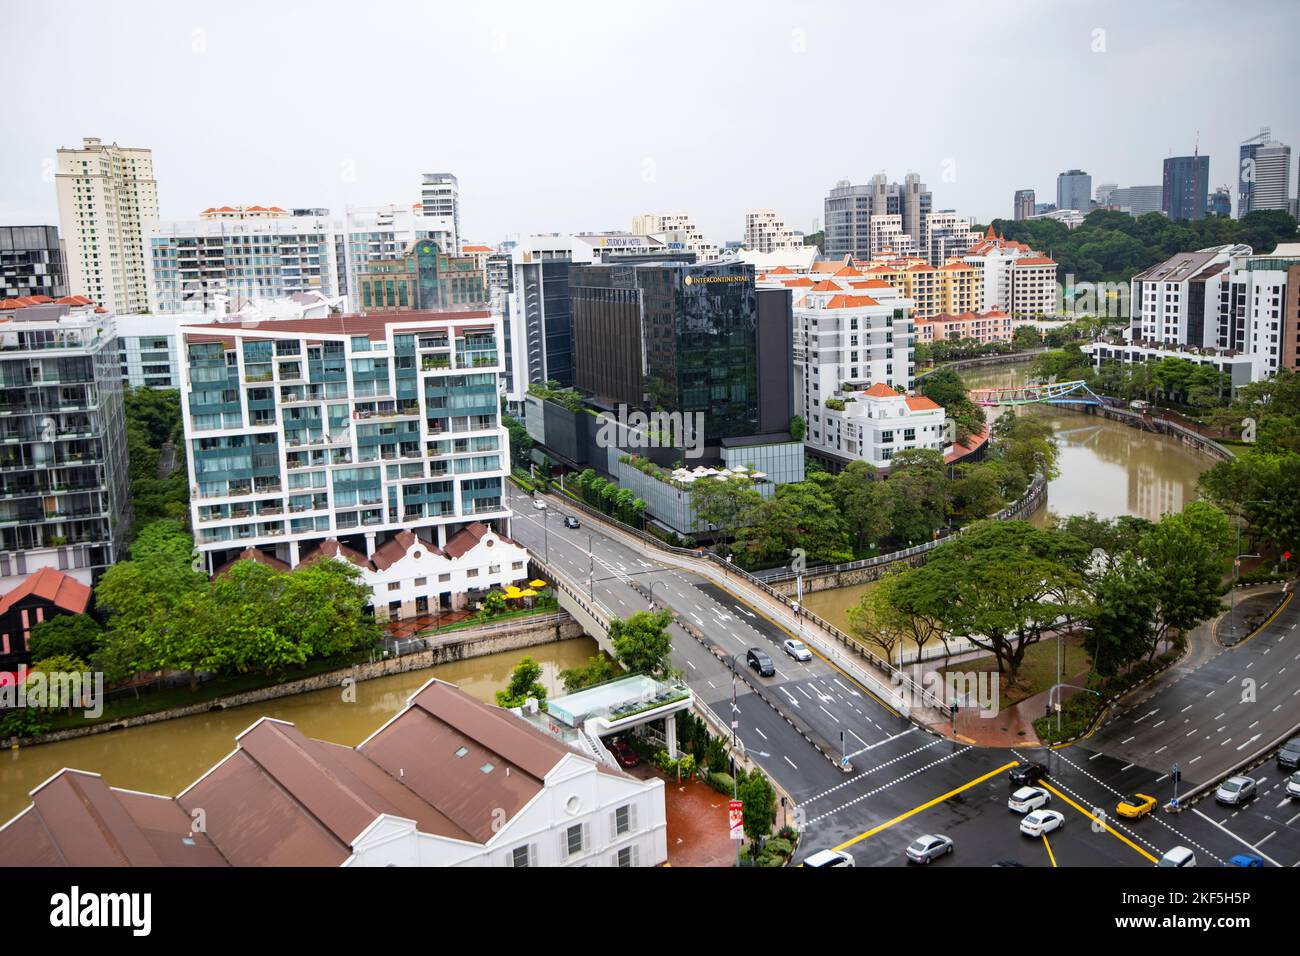 Singapore city centre buildings and traffic complex Stock Photo